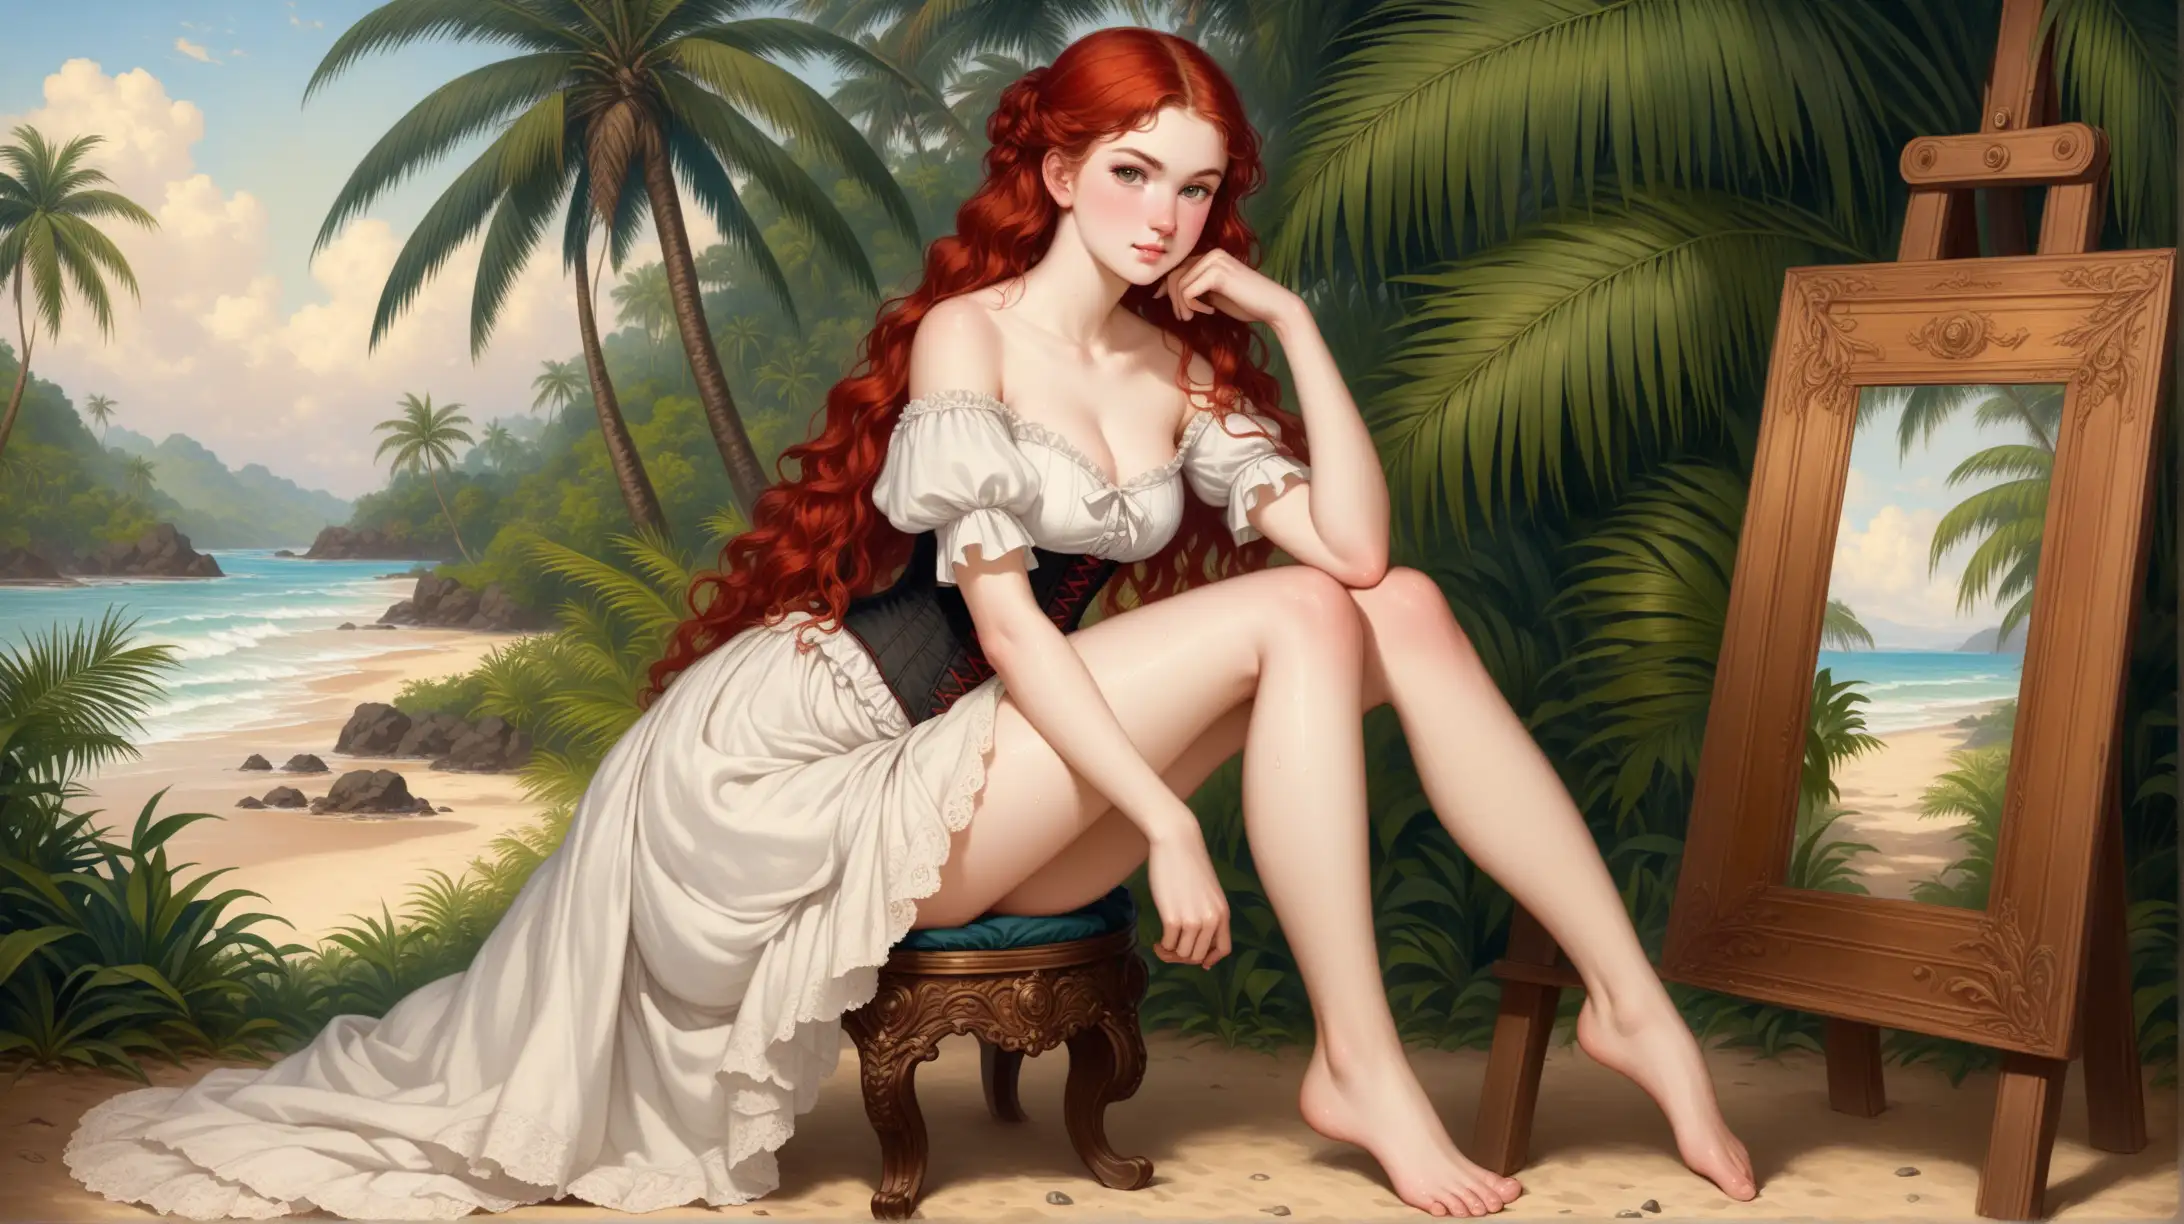 British Young Wife Portrait 22YearOld Woman in Tropics with Curly Red Hair and Bare Feet